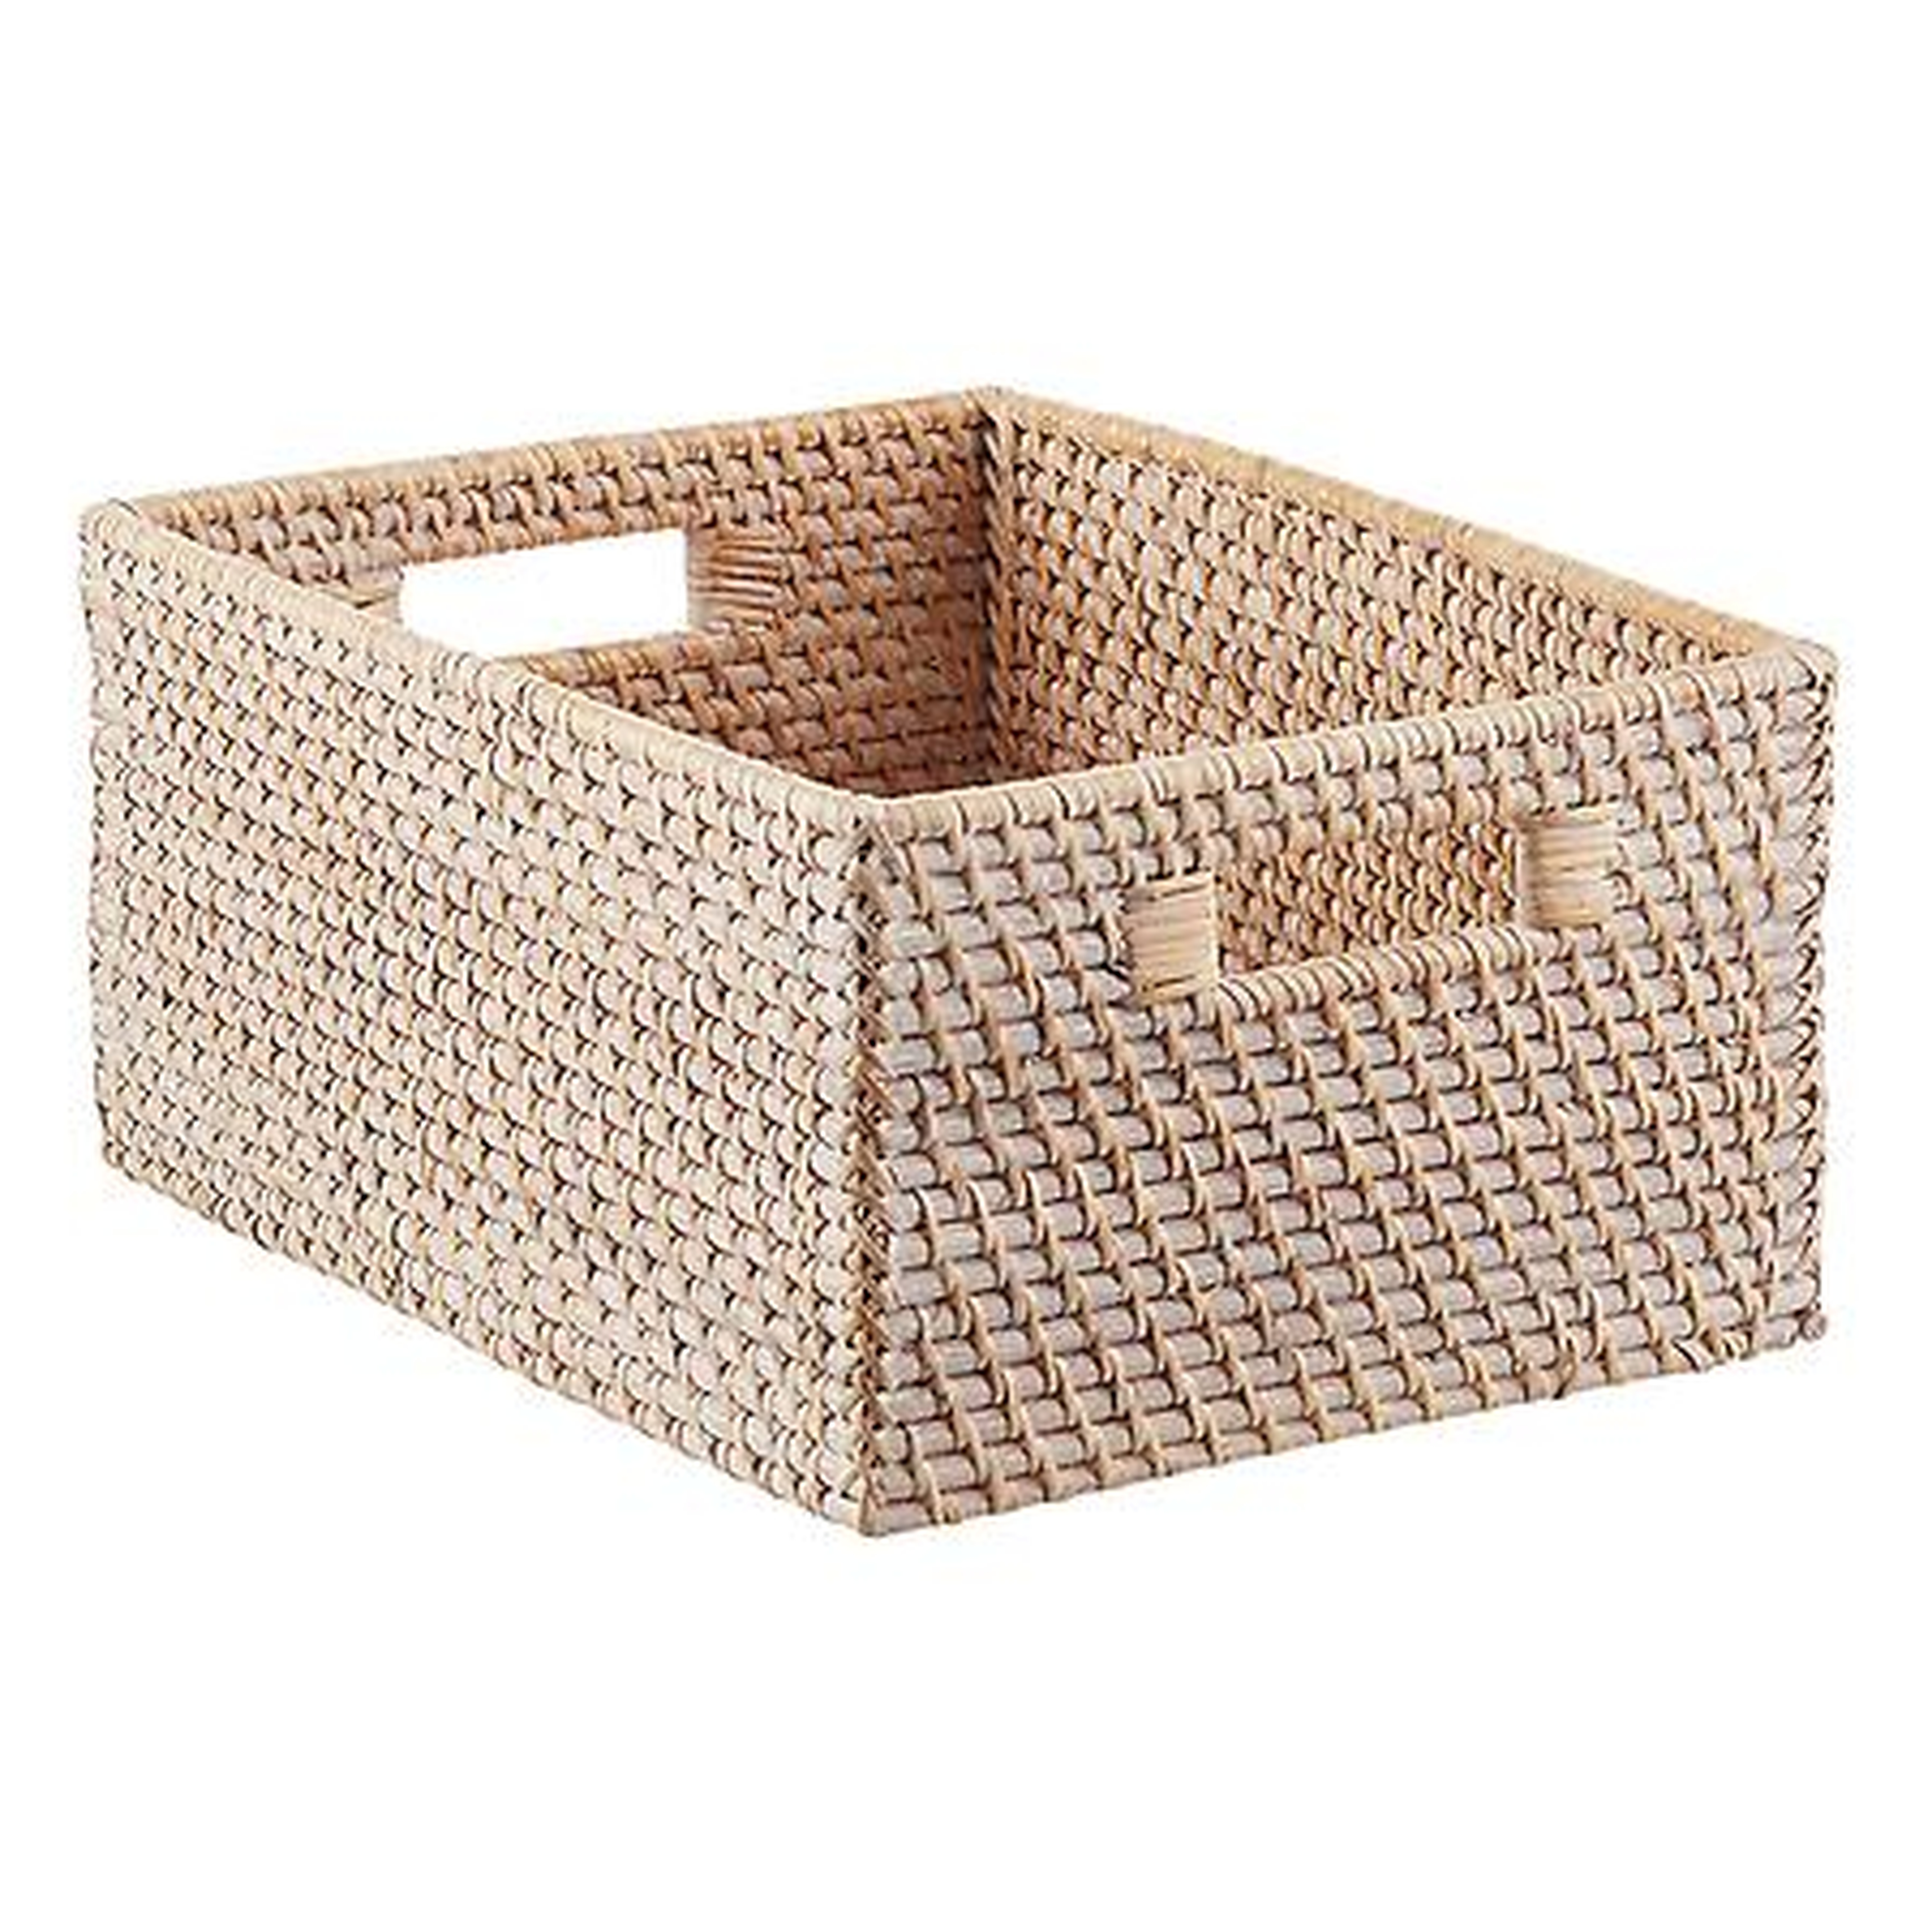 Whitewashed Rattan Bin - containerstore.com